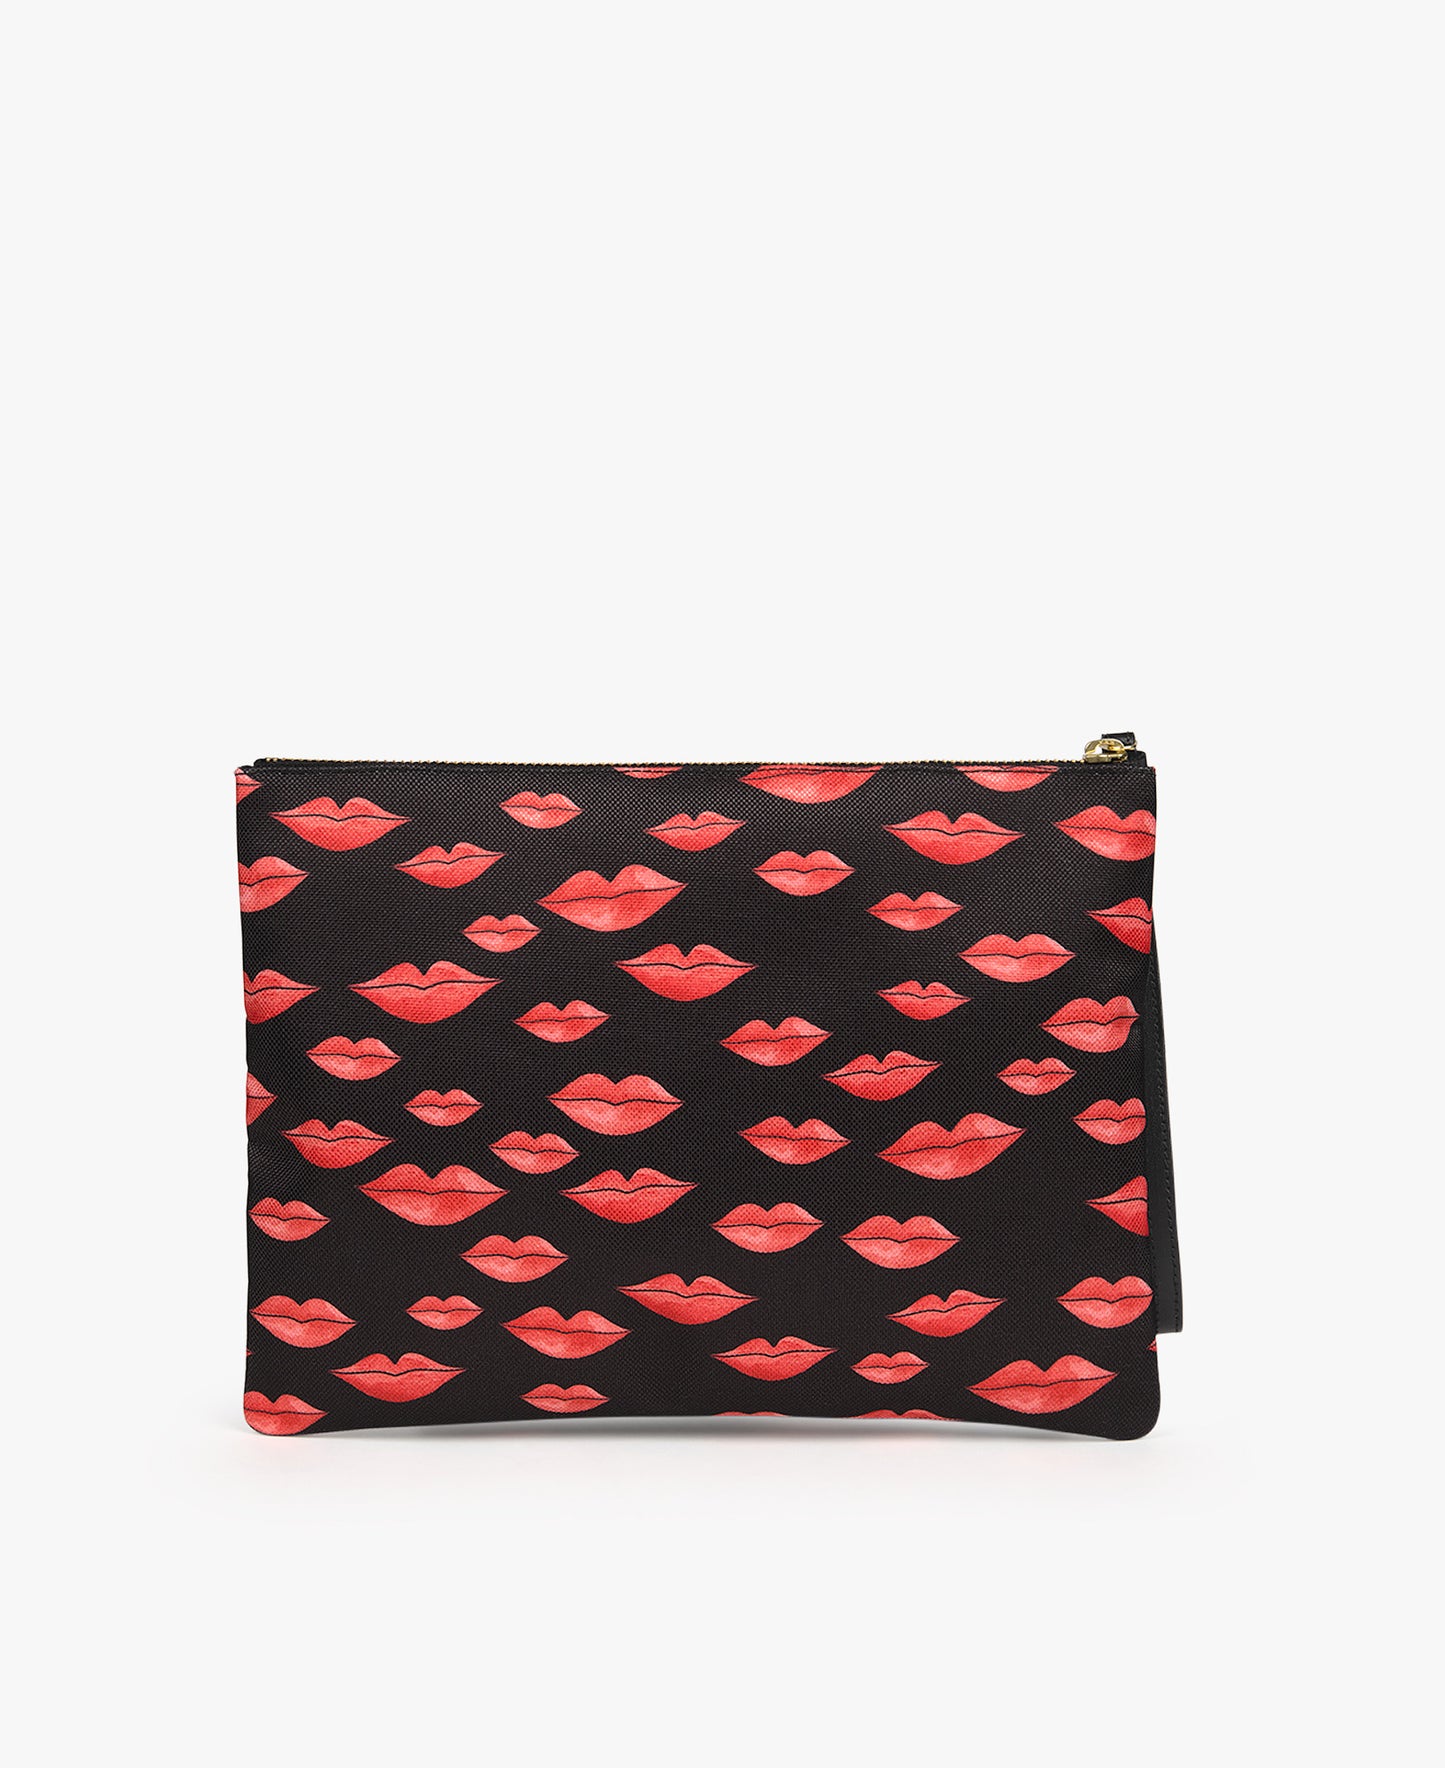 Beso XL Pouch Bag